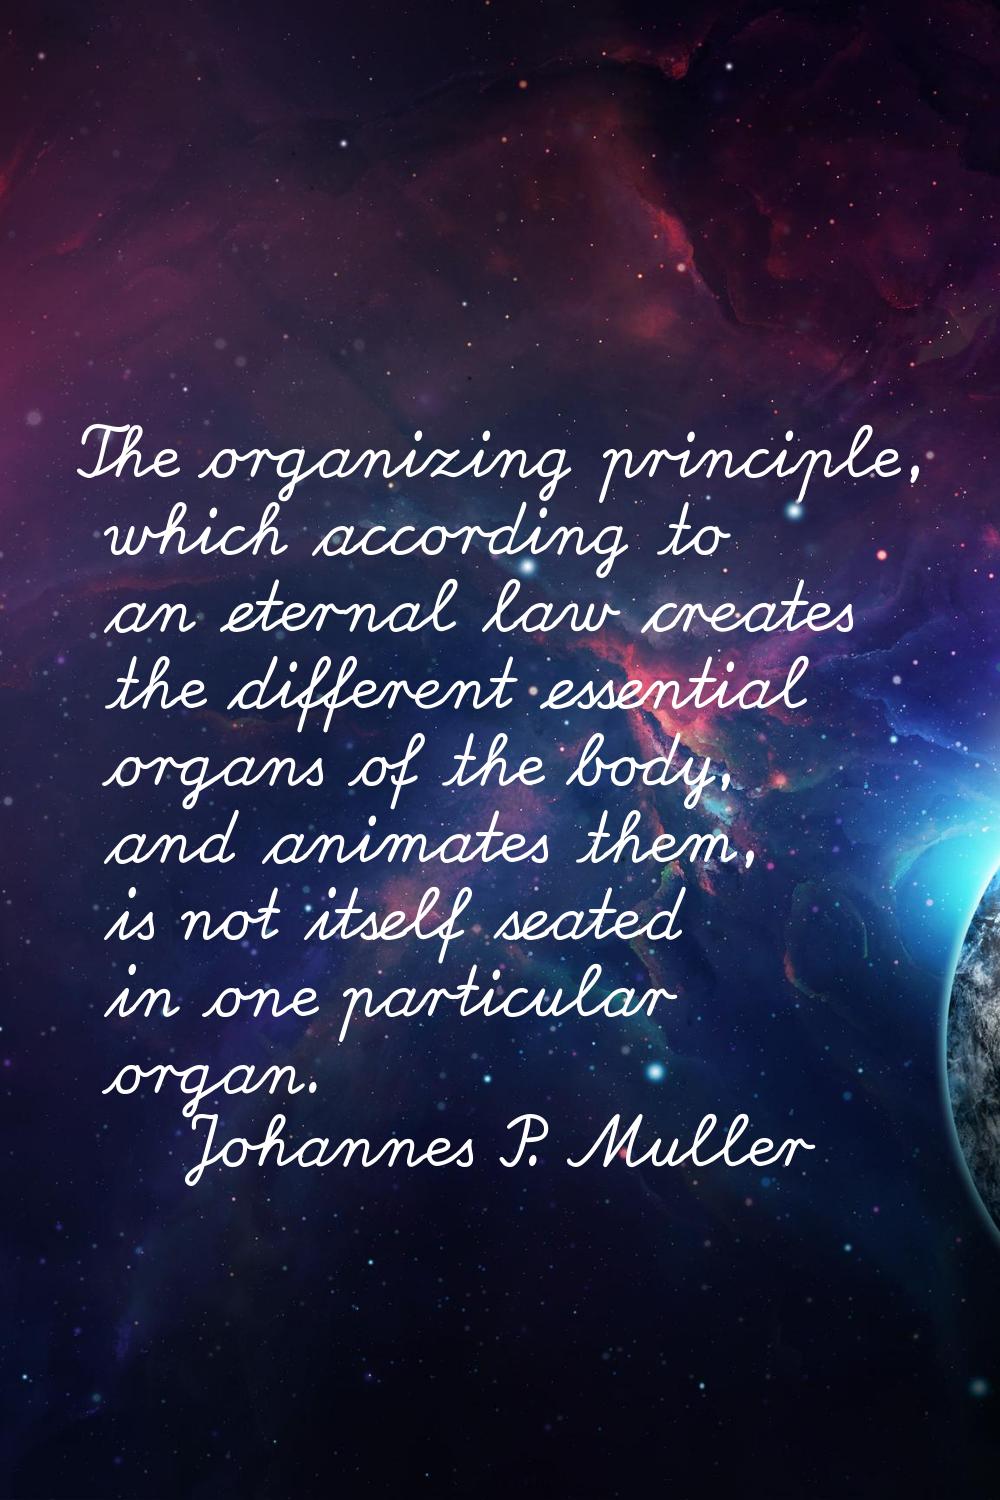 The organizing principle, which according to an eternal law creates the different essential organs 